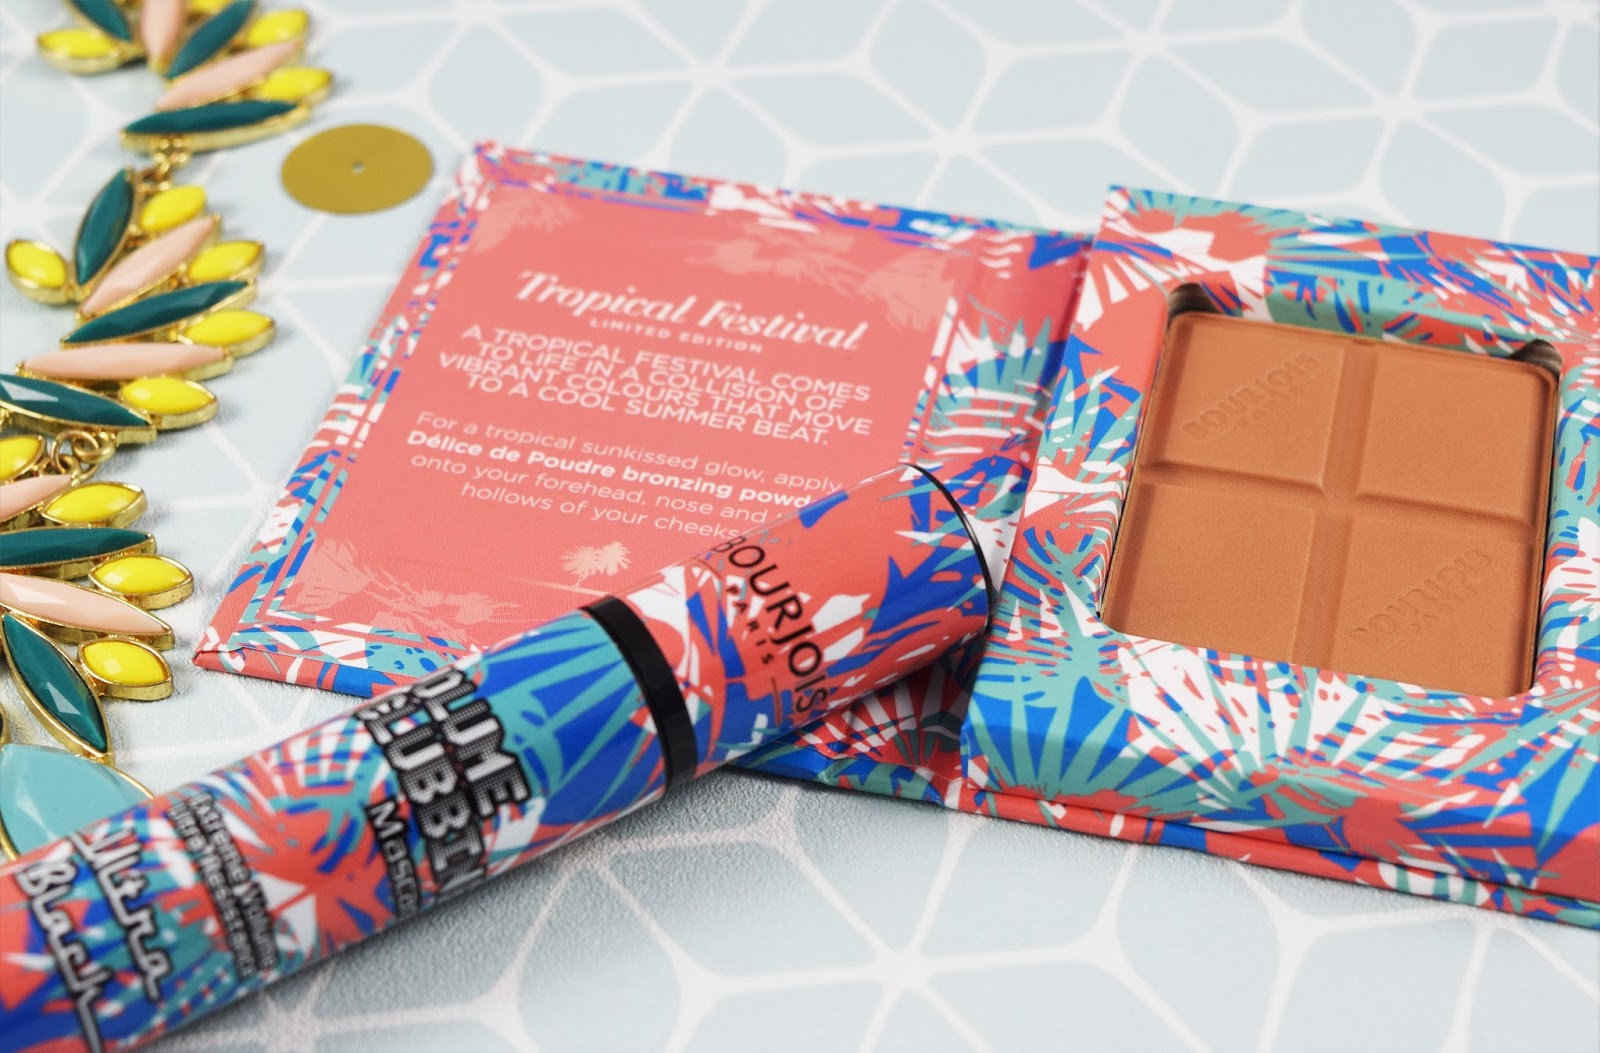 Seaboard Ny mening analysere BOURJOIS SUMMER 2016 RELEASES - A Life With Frills